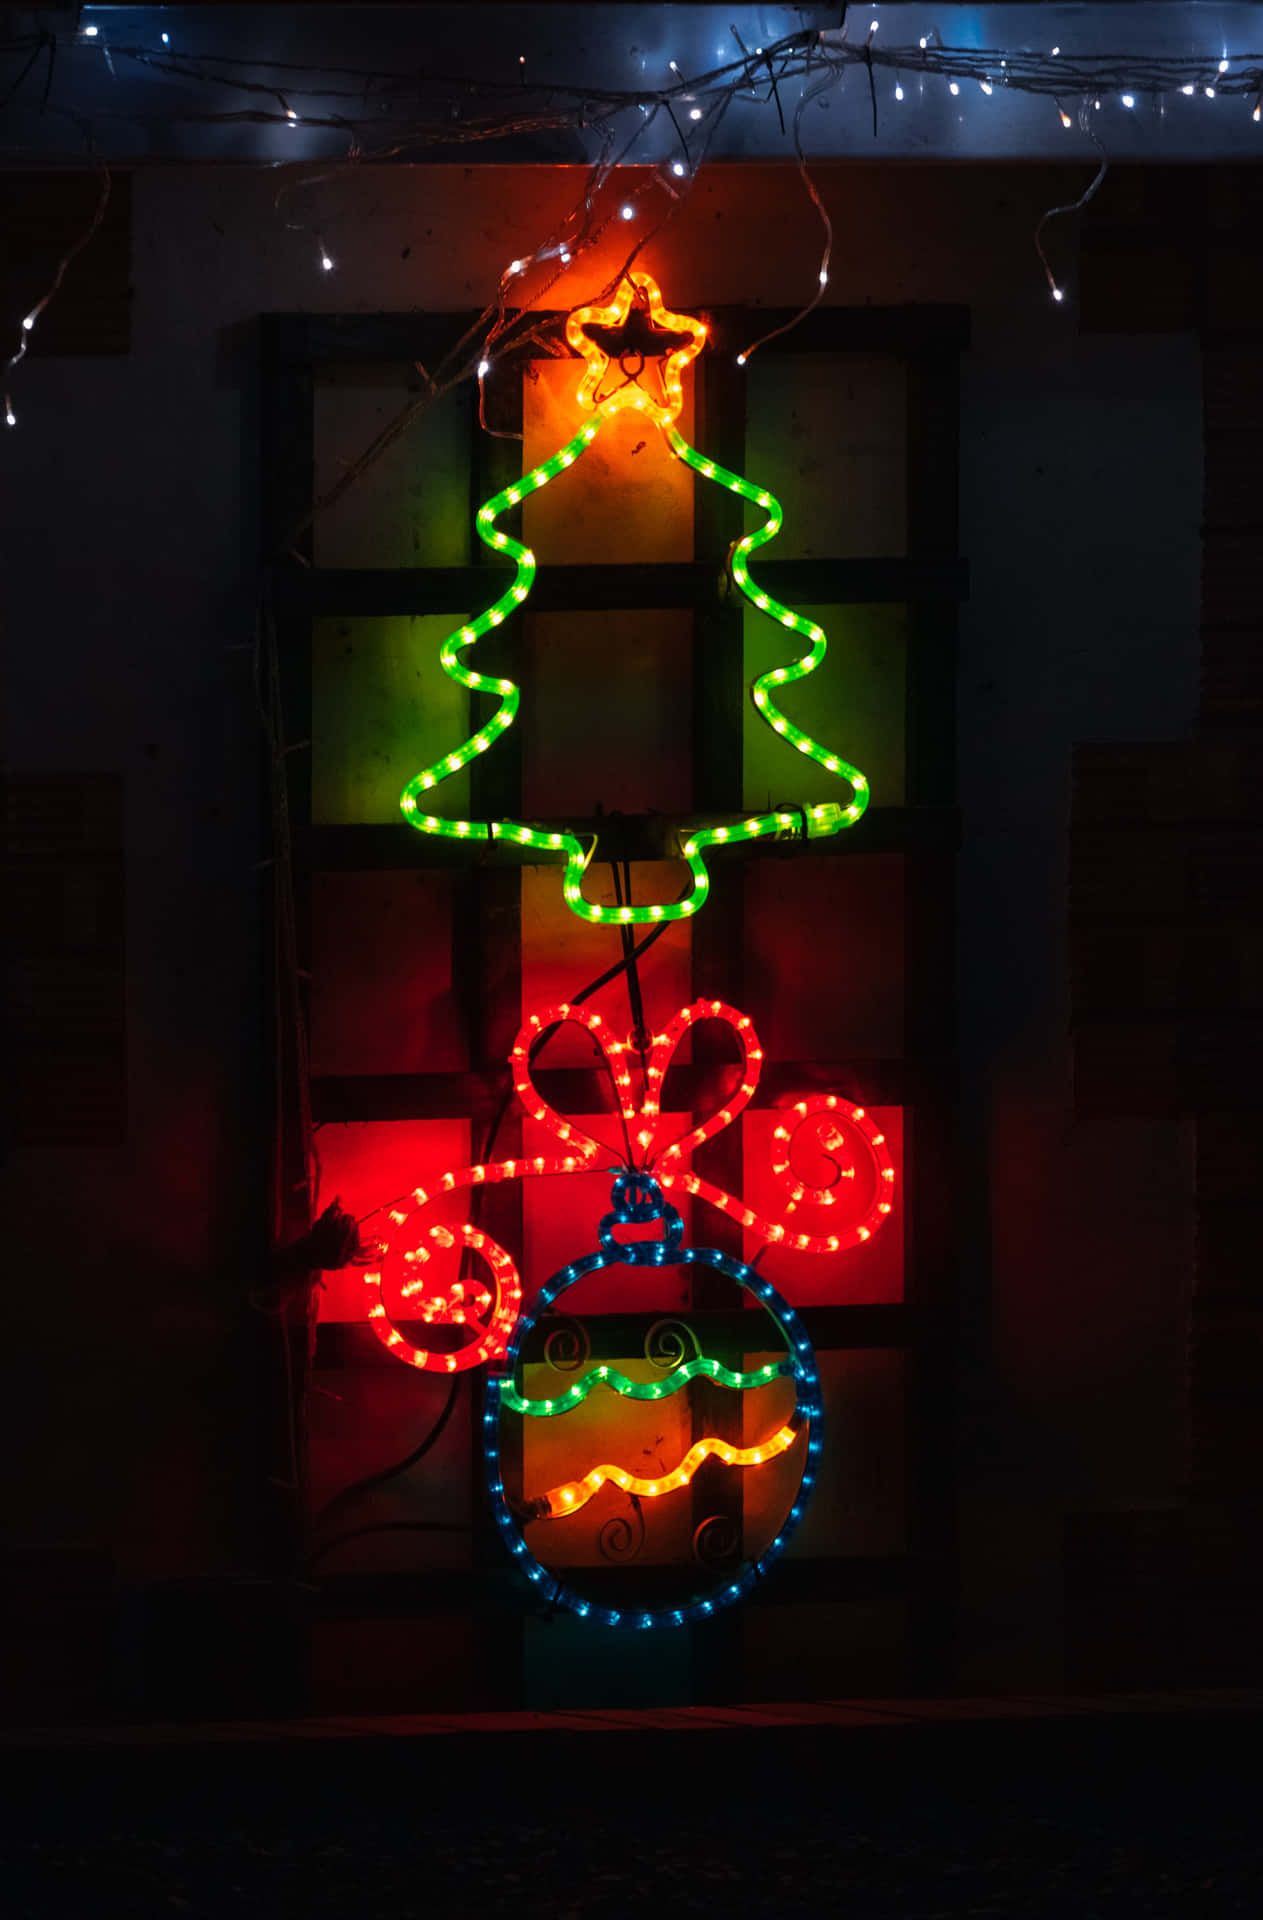 Brighten Up Your Holidays with Christmas Lights